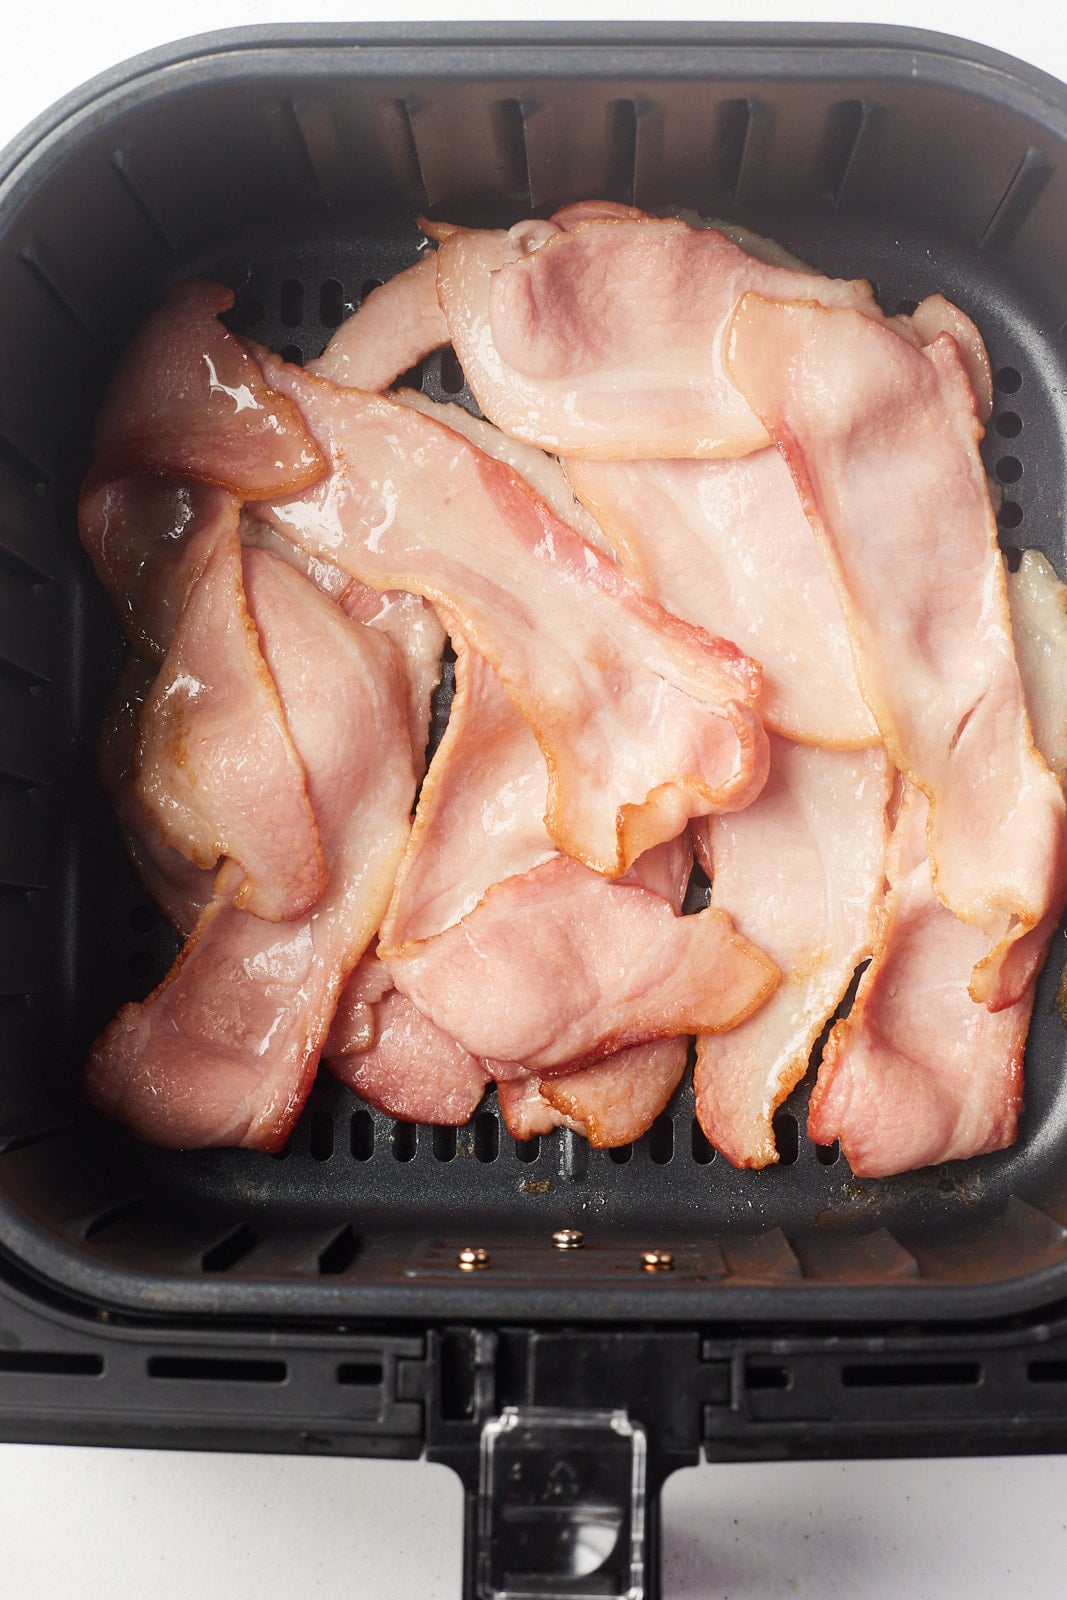 Bacon starting to cook the air fryer basket.